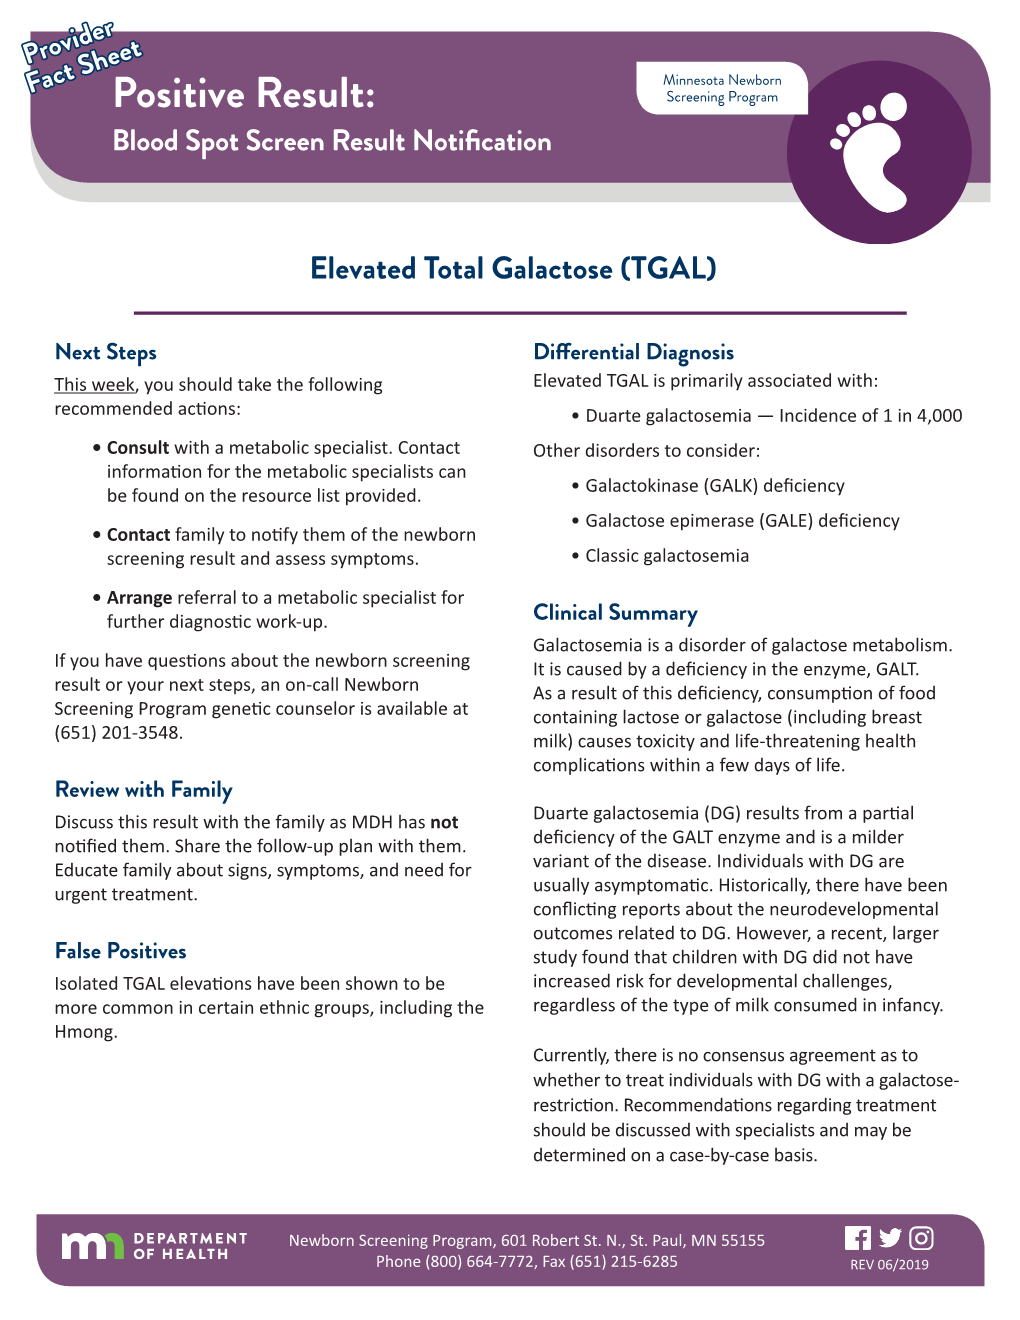 Elevated Total Galactose (TGAL) Provider Fact Sheet